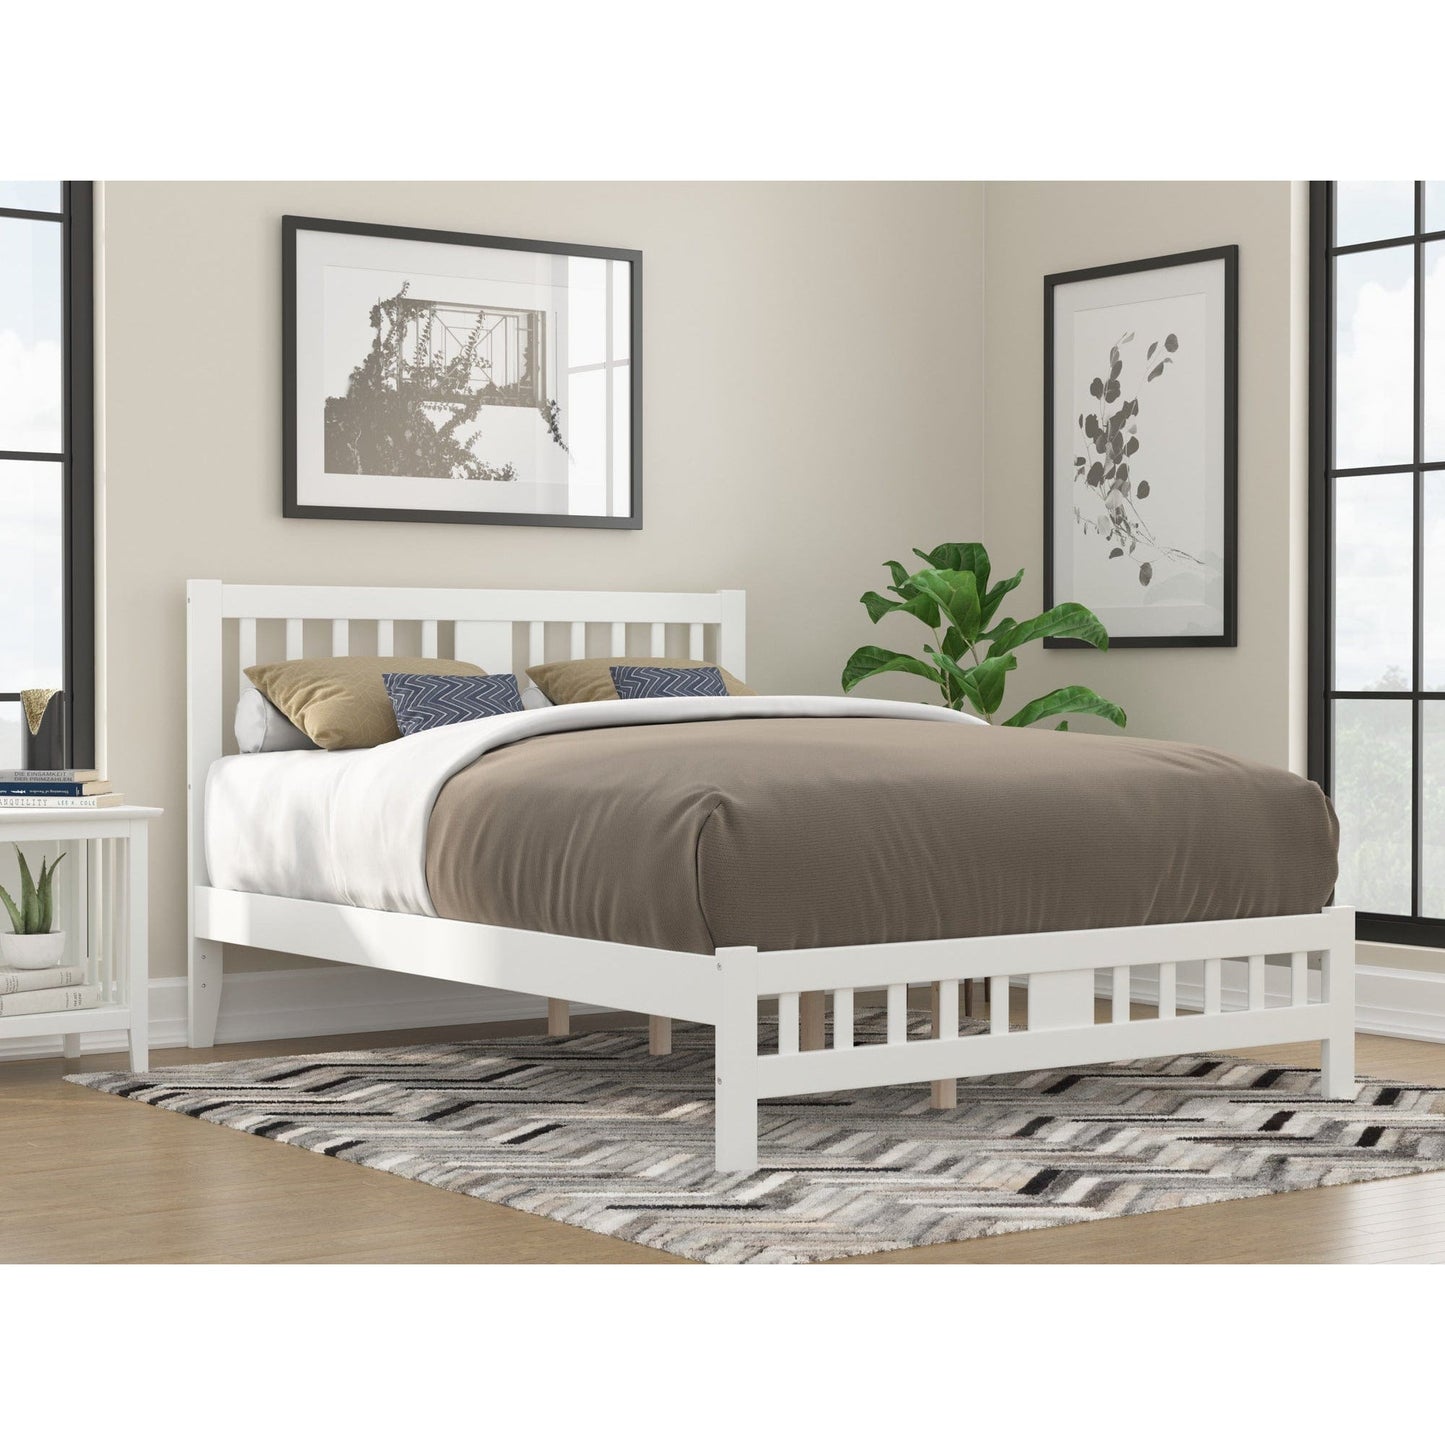 AFI Furnishings Tahoe Queen Bed with Footboard in White AG8960042